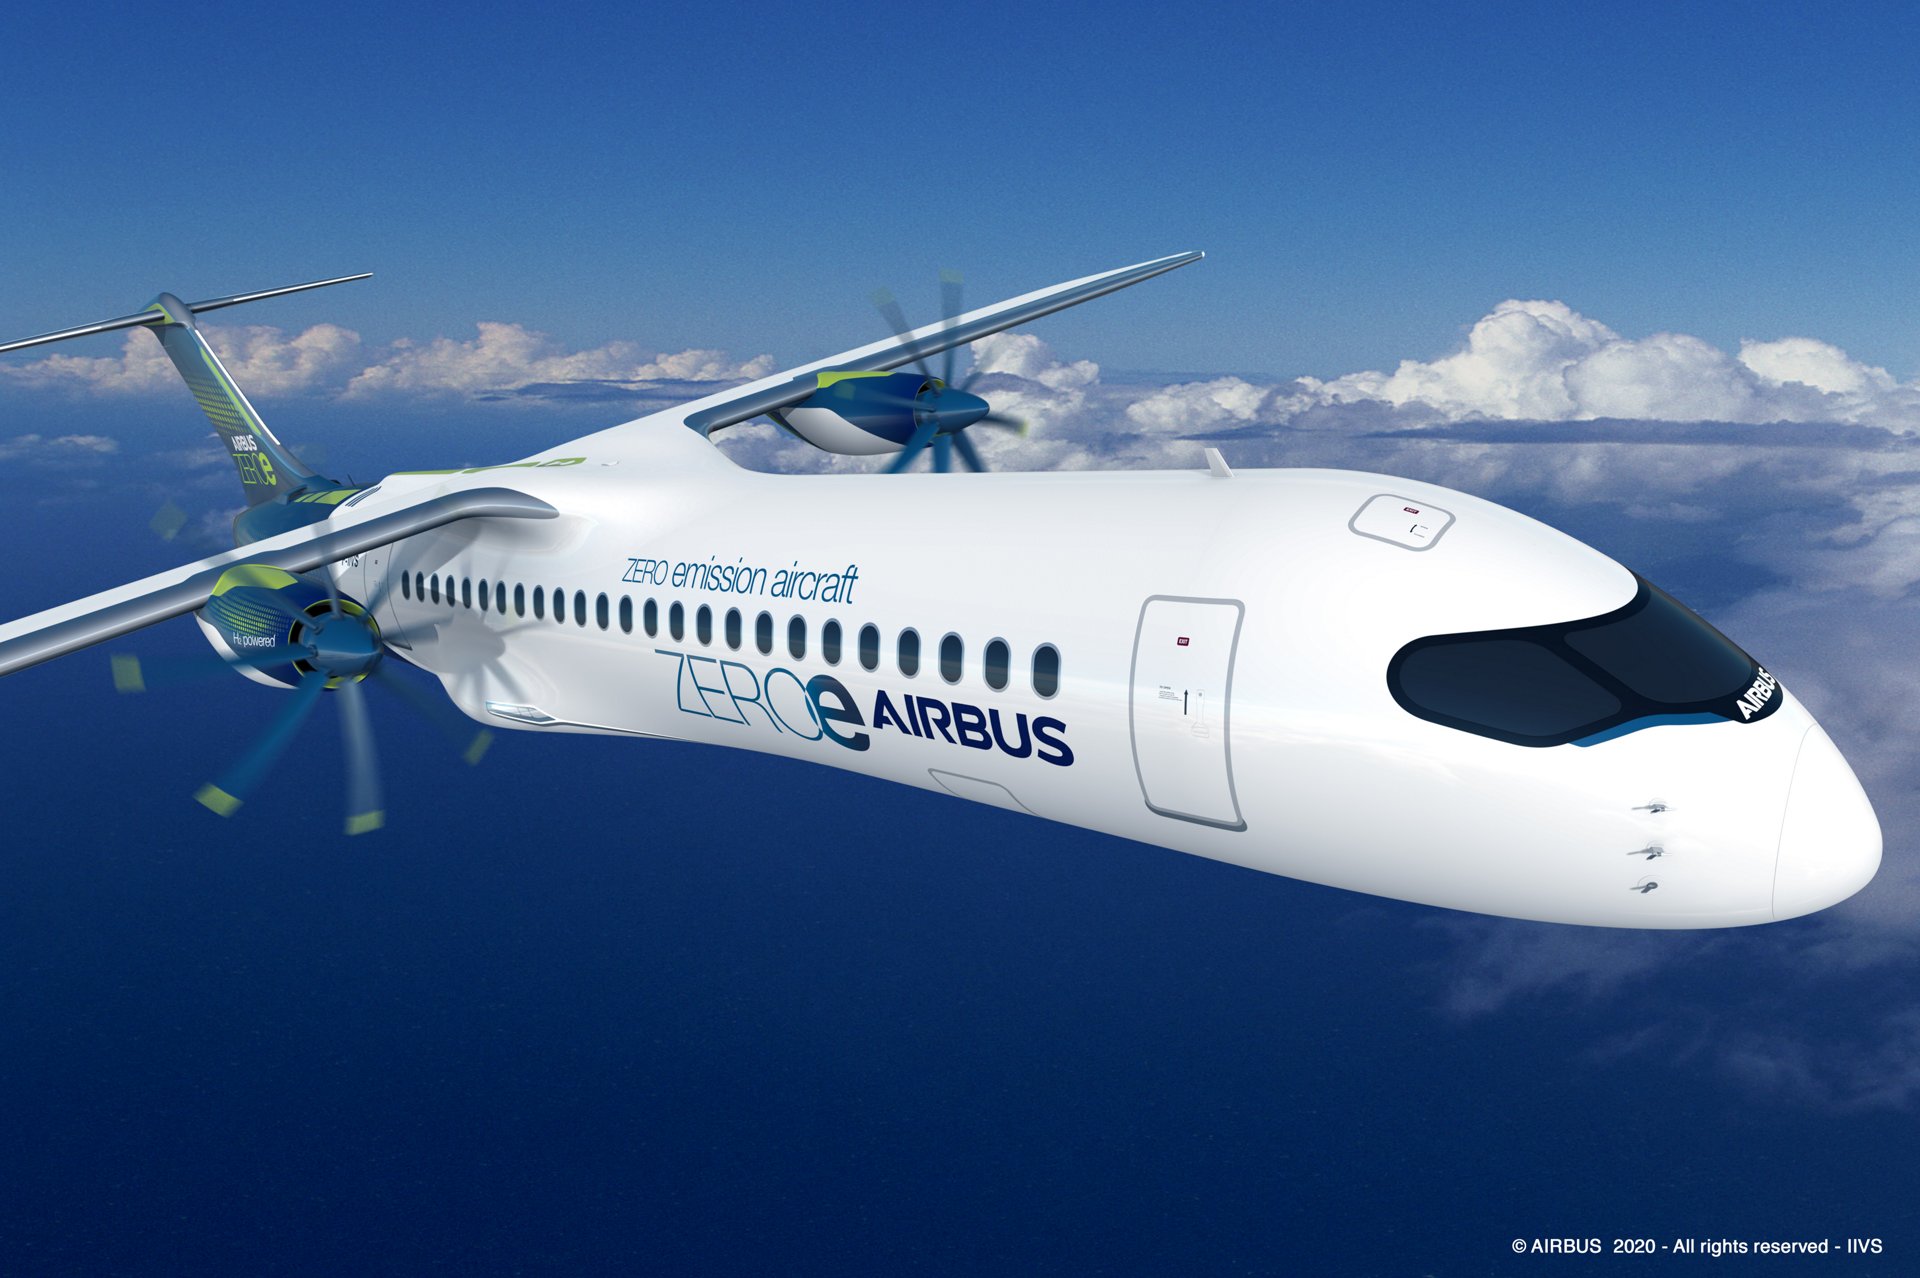 ZEROe is an Airbus concept aircraft. In the turboprop configuration, two hybrid hydrogen turboprop engines provide thrust. The liquid hydrogen storage and distribution system is located behind the rear pressure bulkhead.  